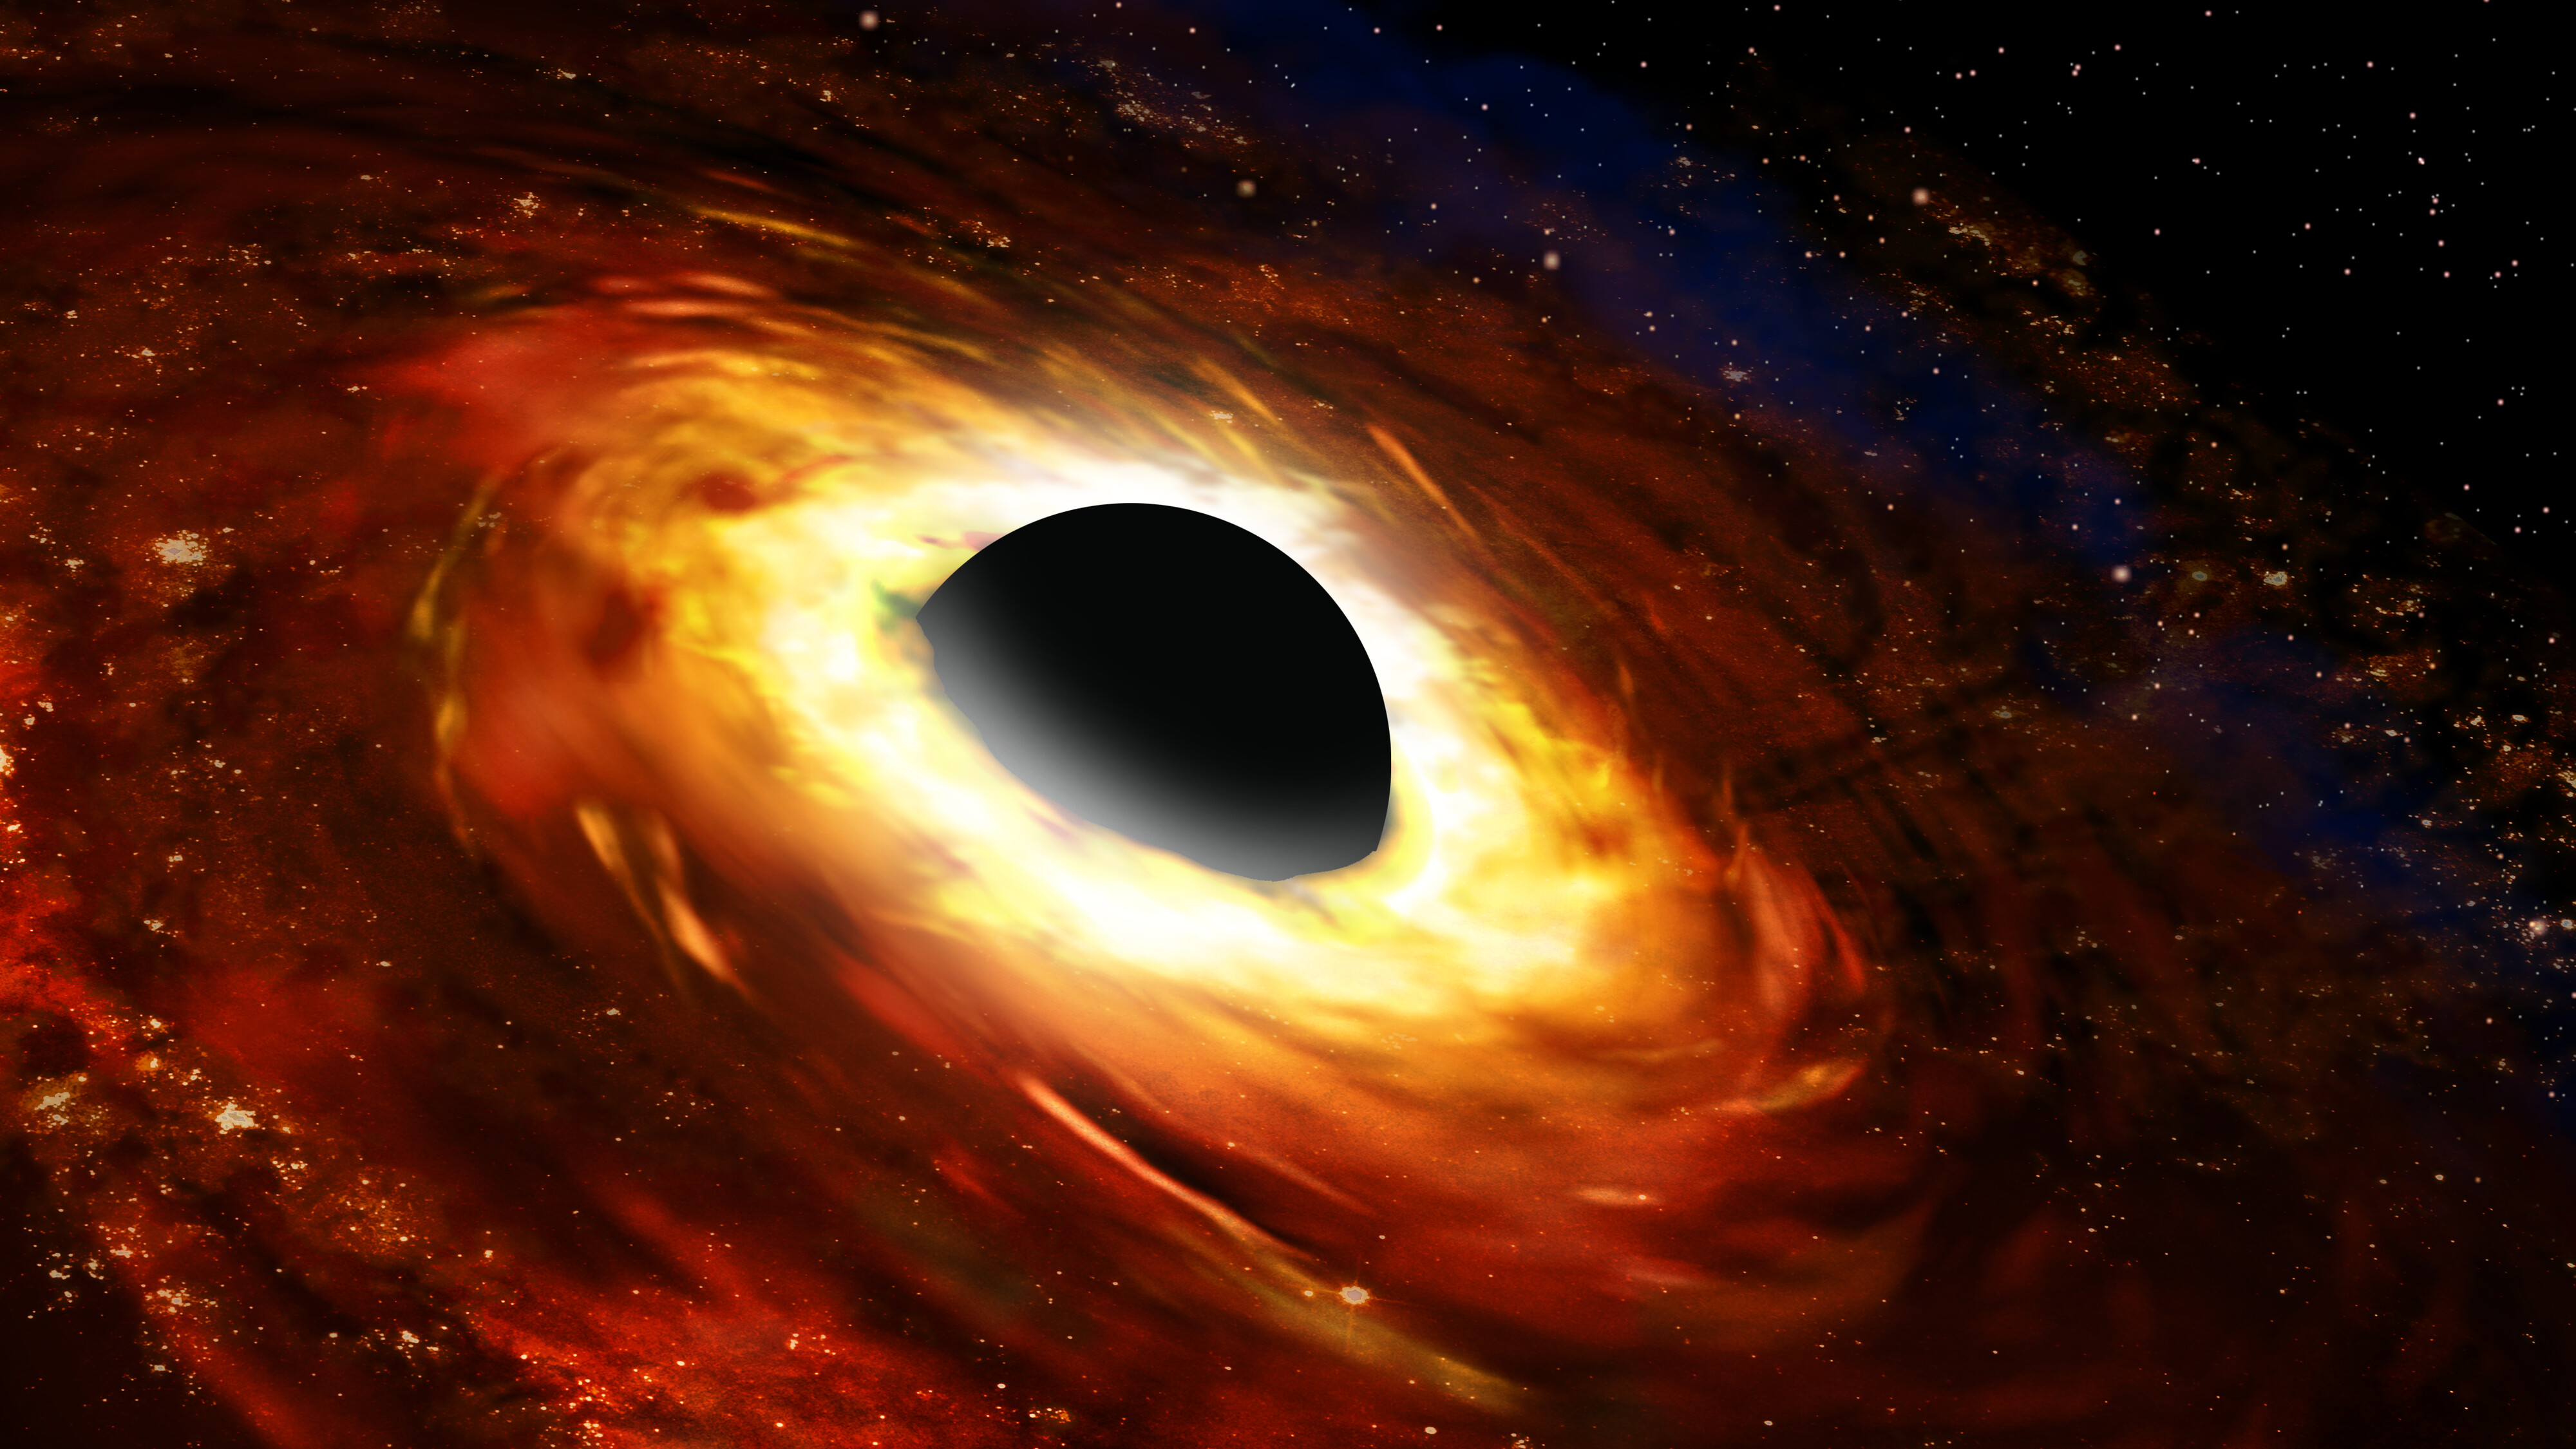 Artist's impression of a black hole and accretion disk | NOIRLab